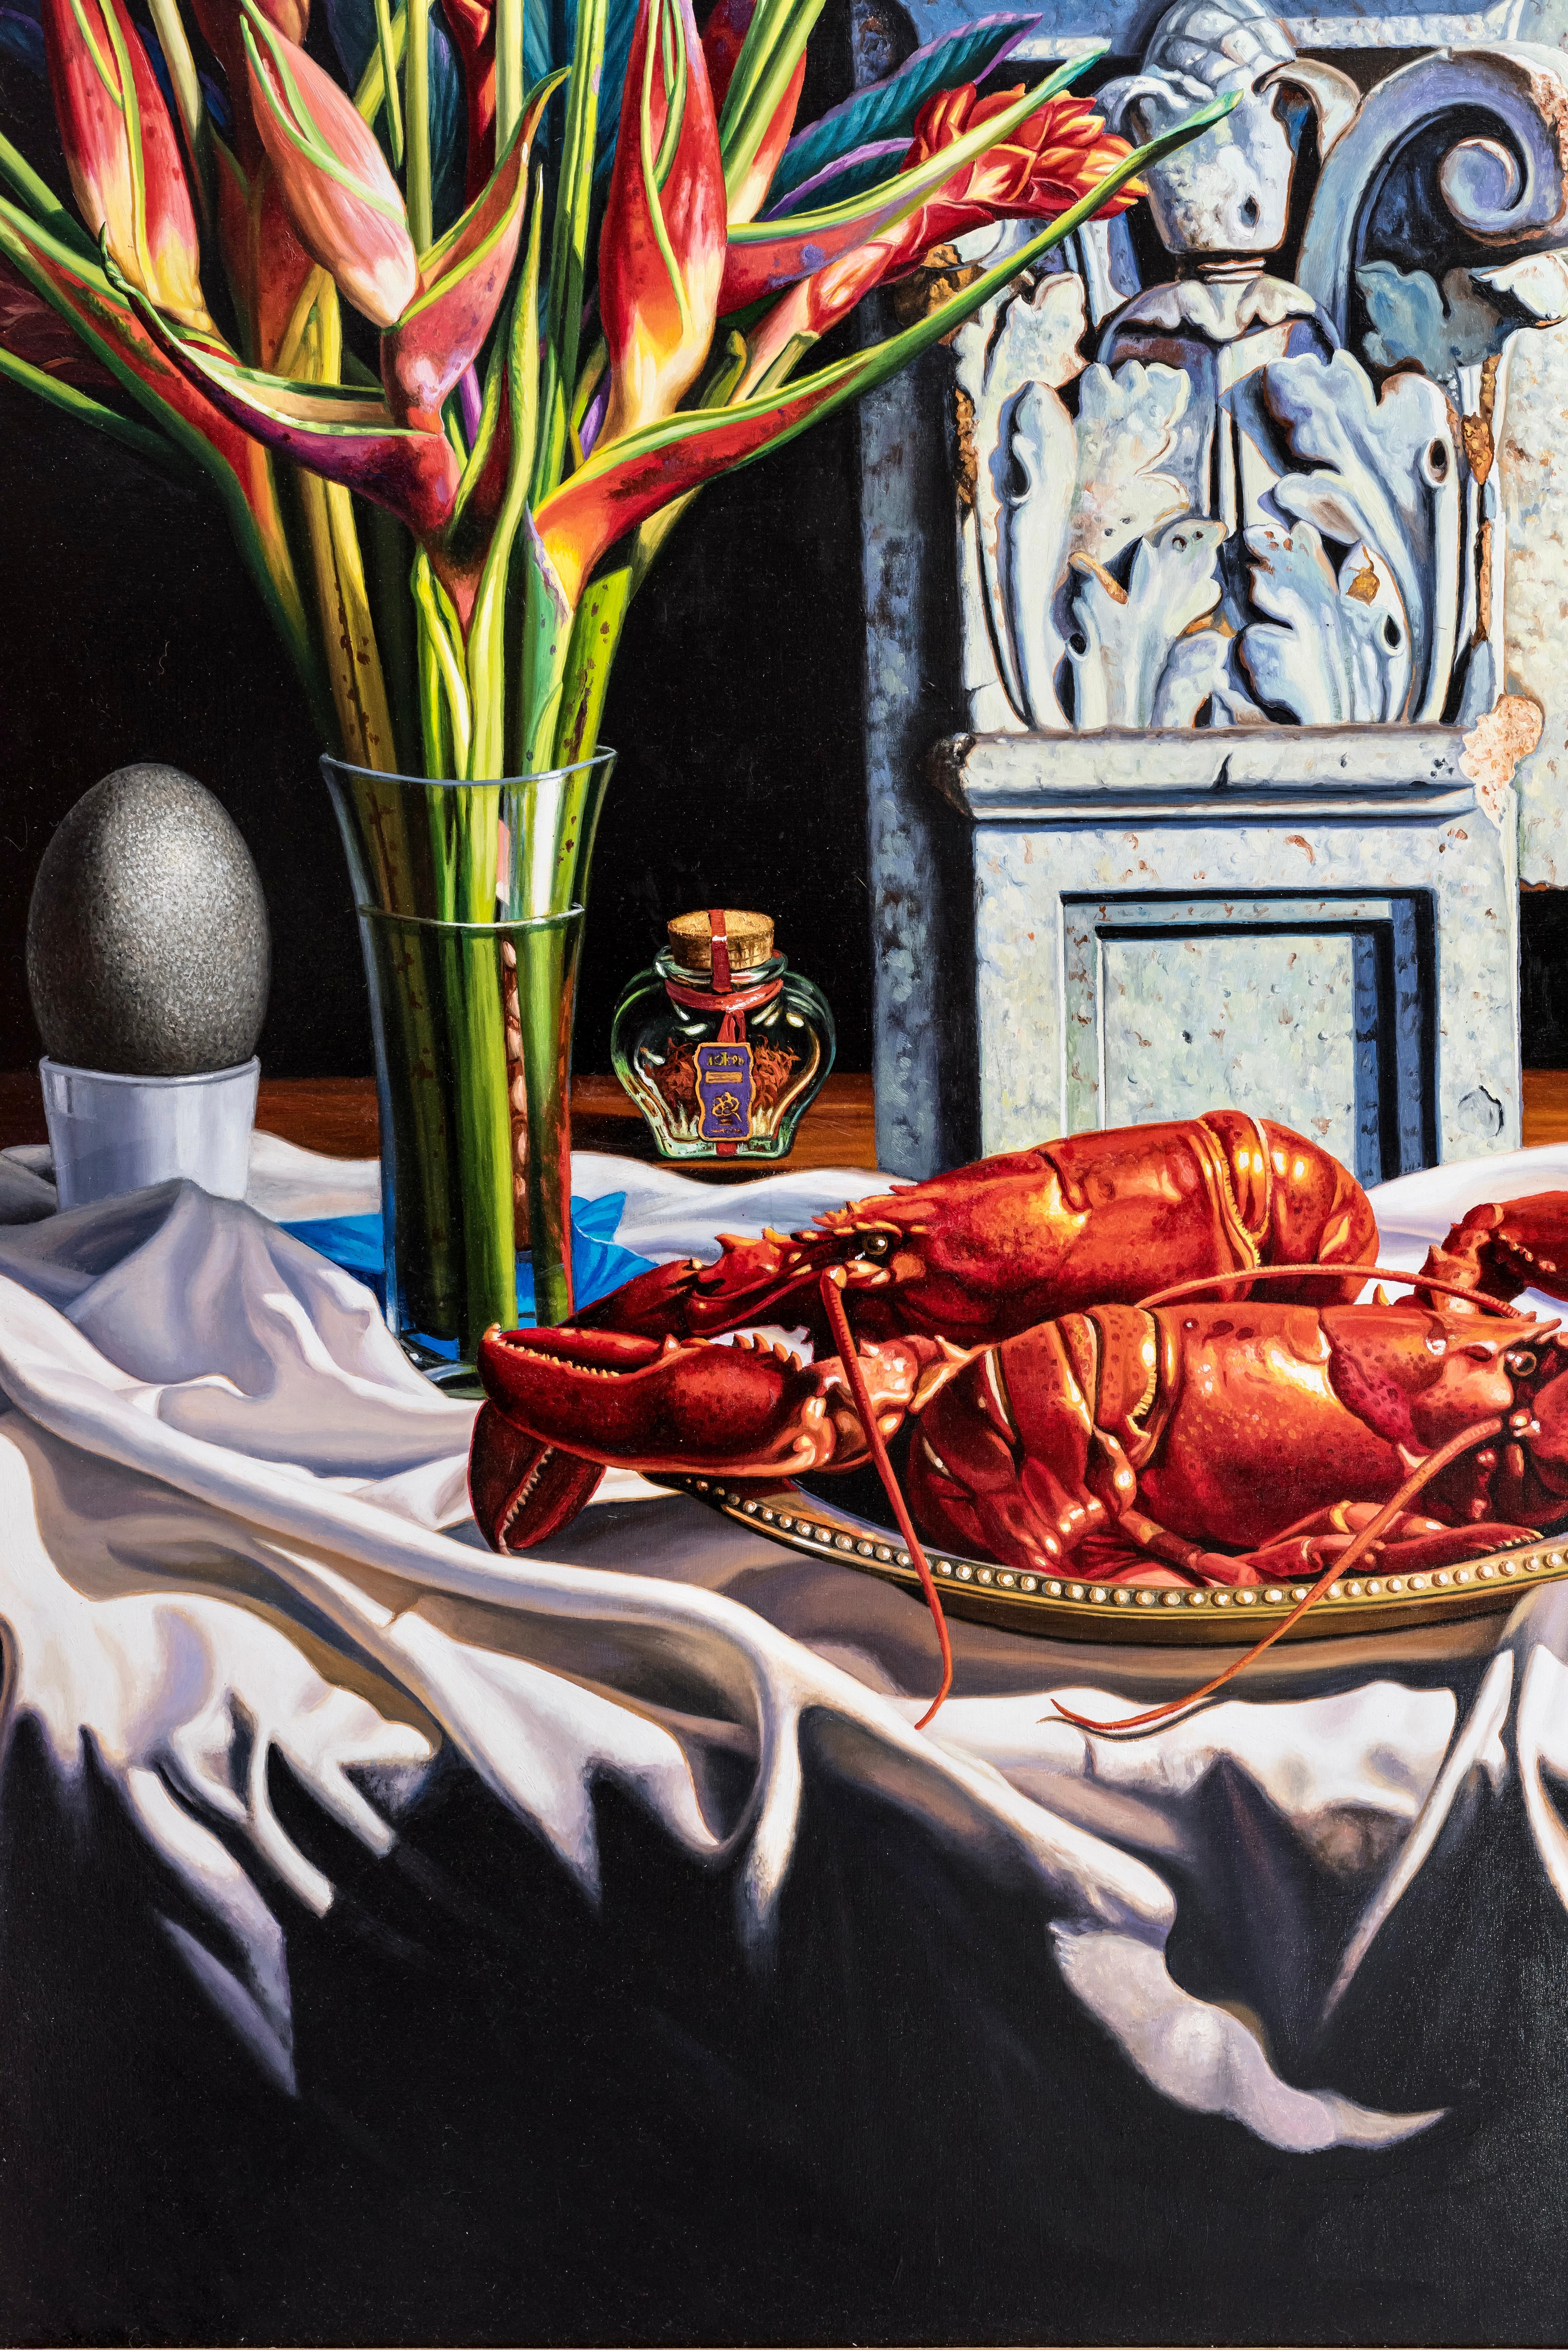 Still Life with Lobster, Helicona, & Silver Pitcher - Painting by Ian Hornak